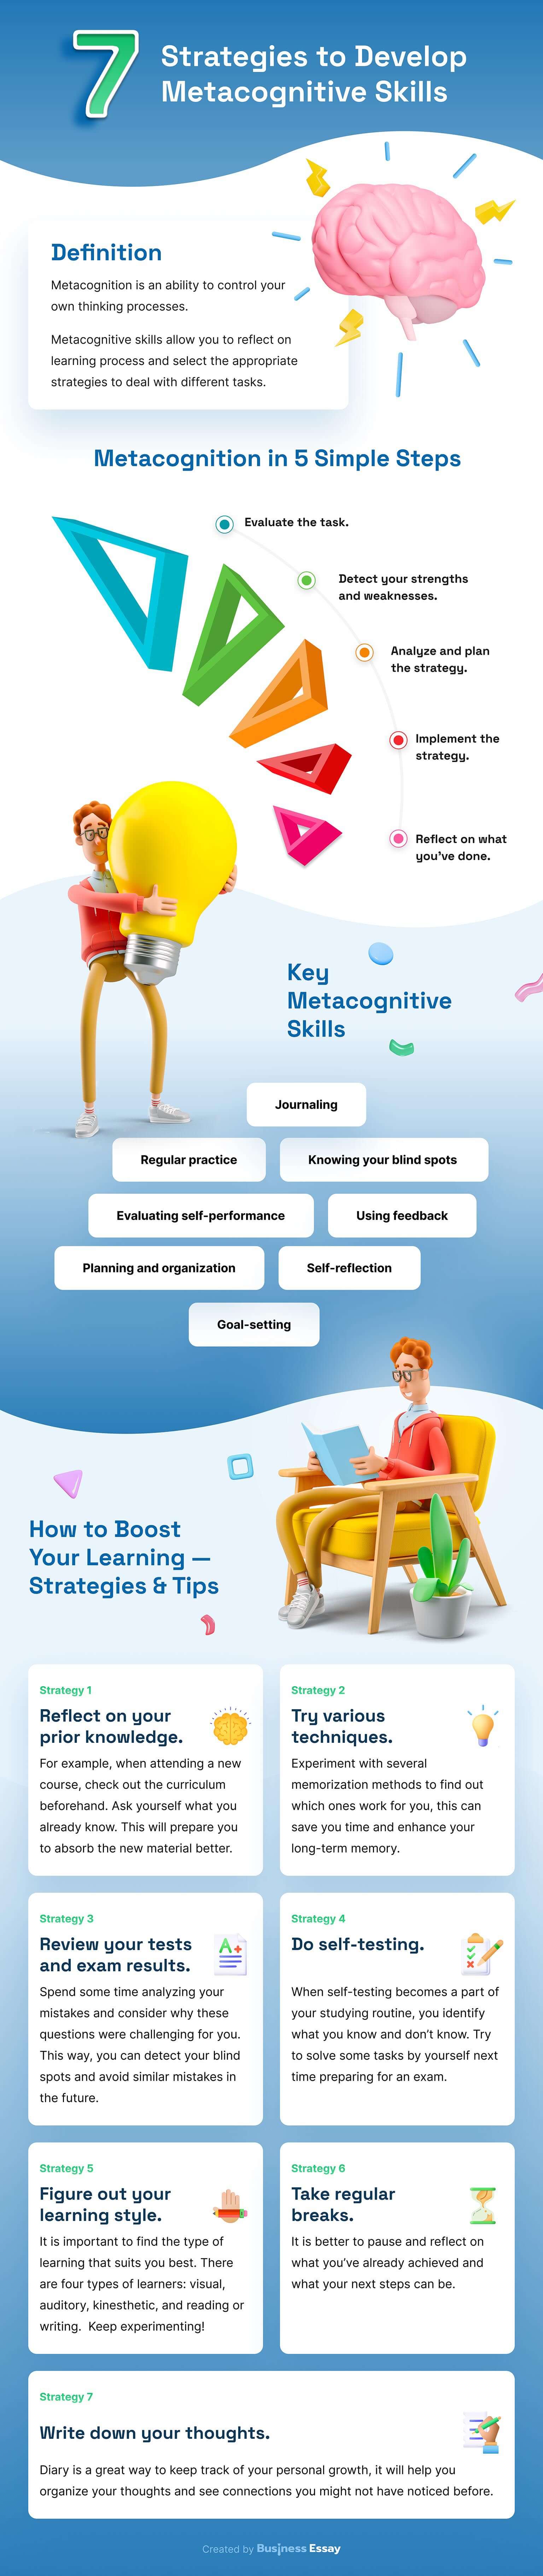 The infographic provides tips and strategies for developing one's metacognitive skills.